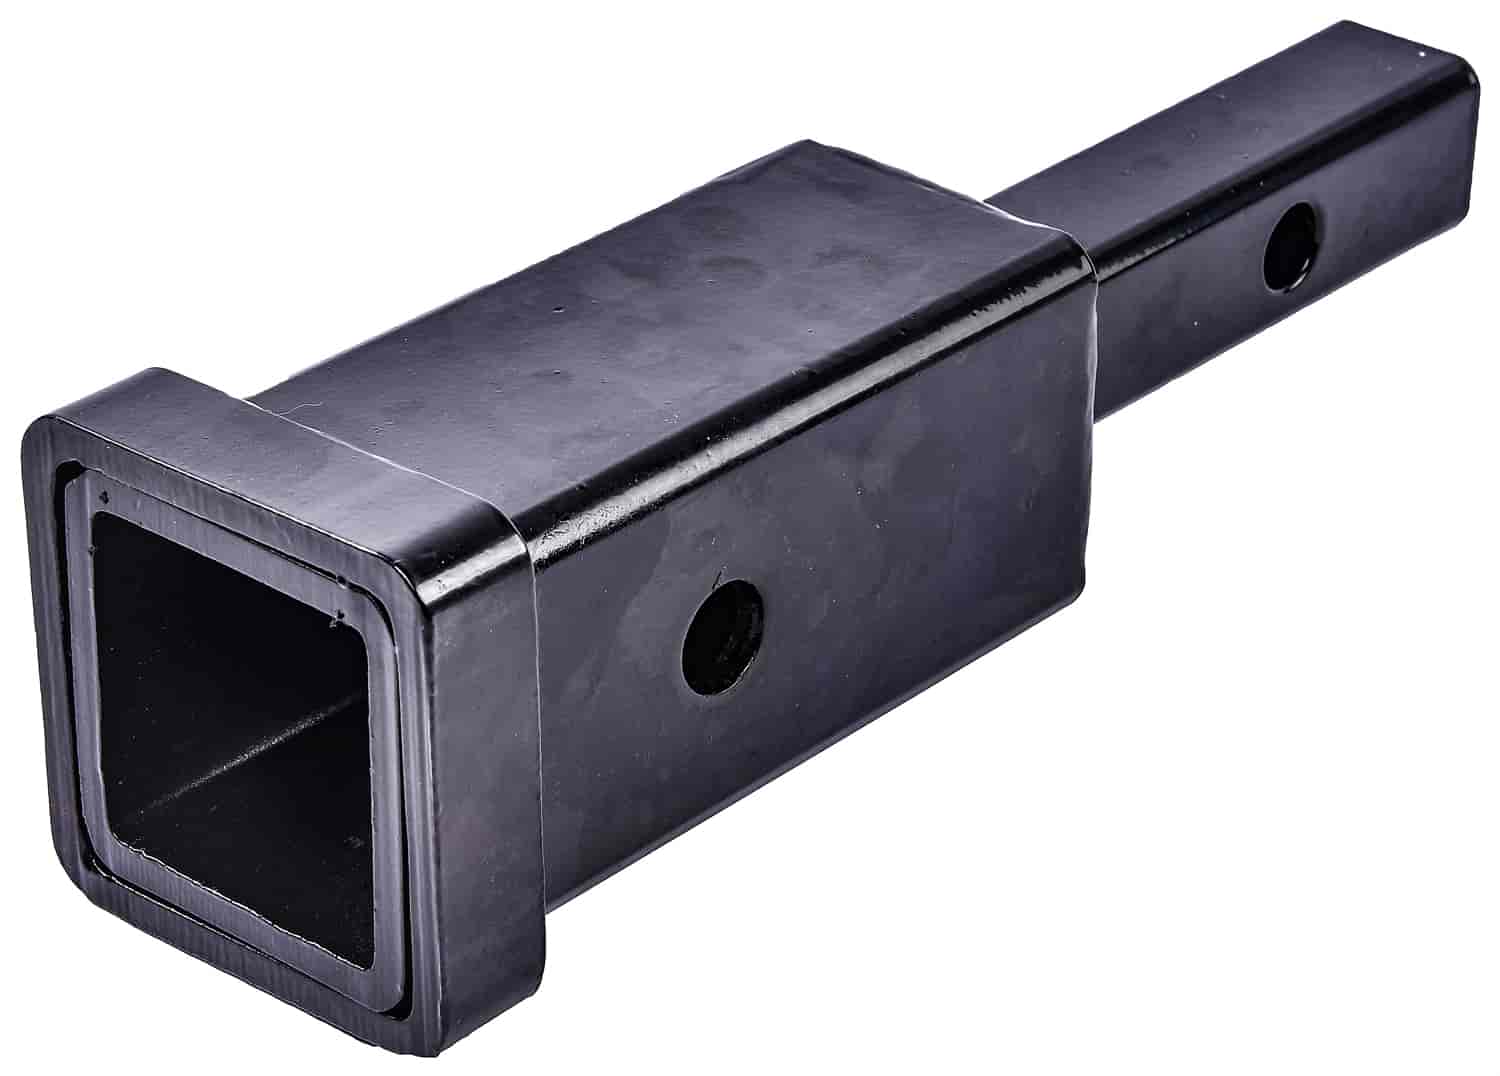 1 1/4" to 2" Trailer Hitch Adapter Receiver with 6 In. Extension